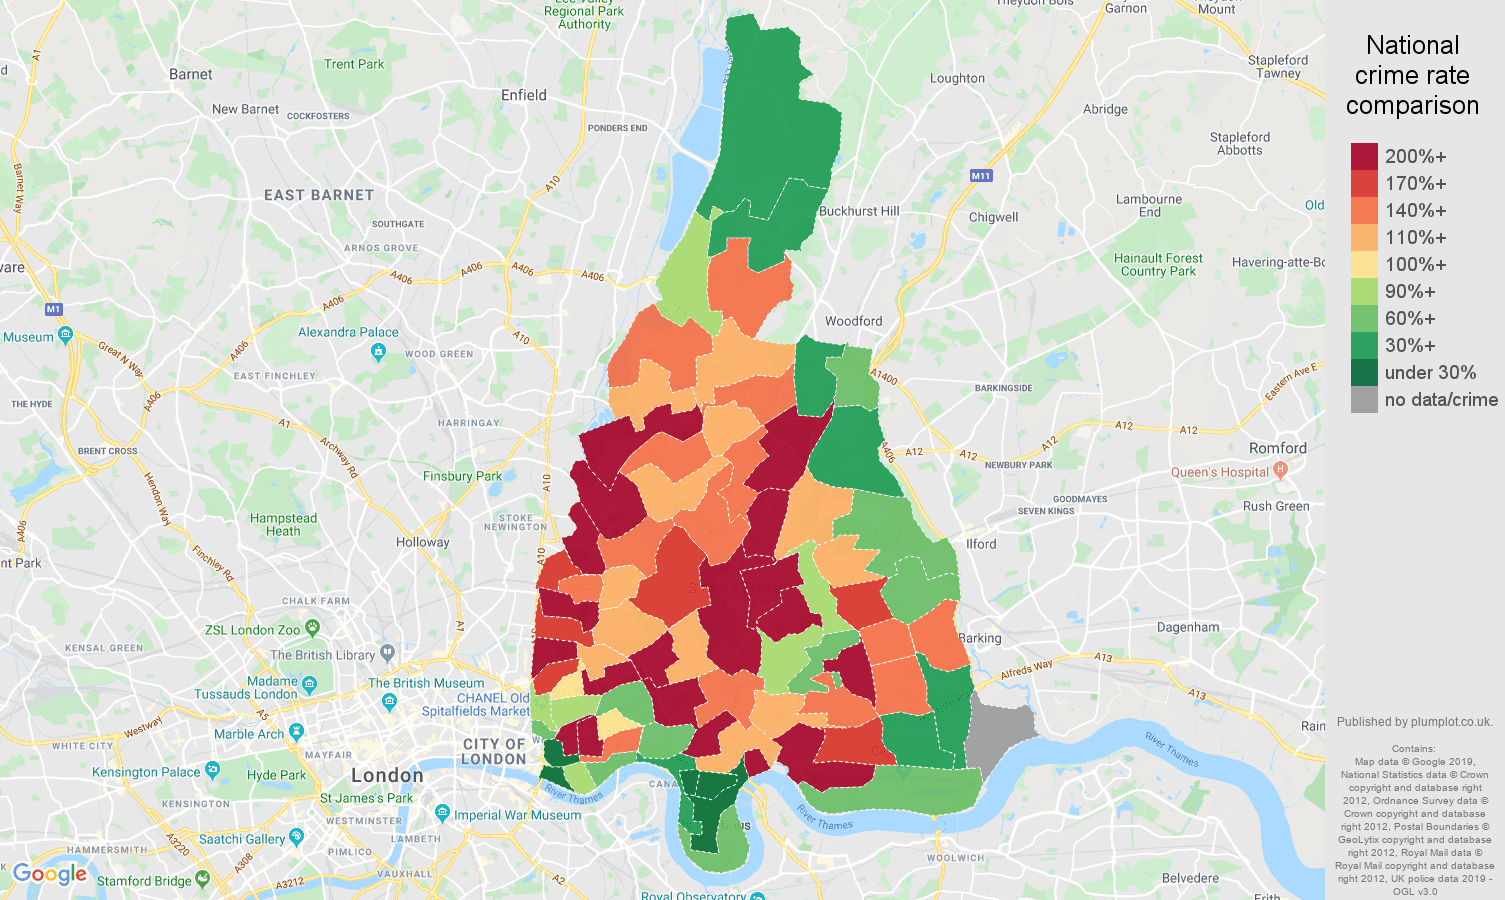 East London possession of weapons crime rate comparison map